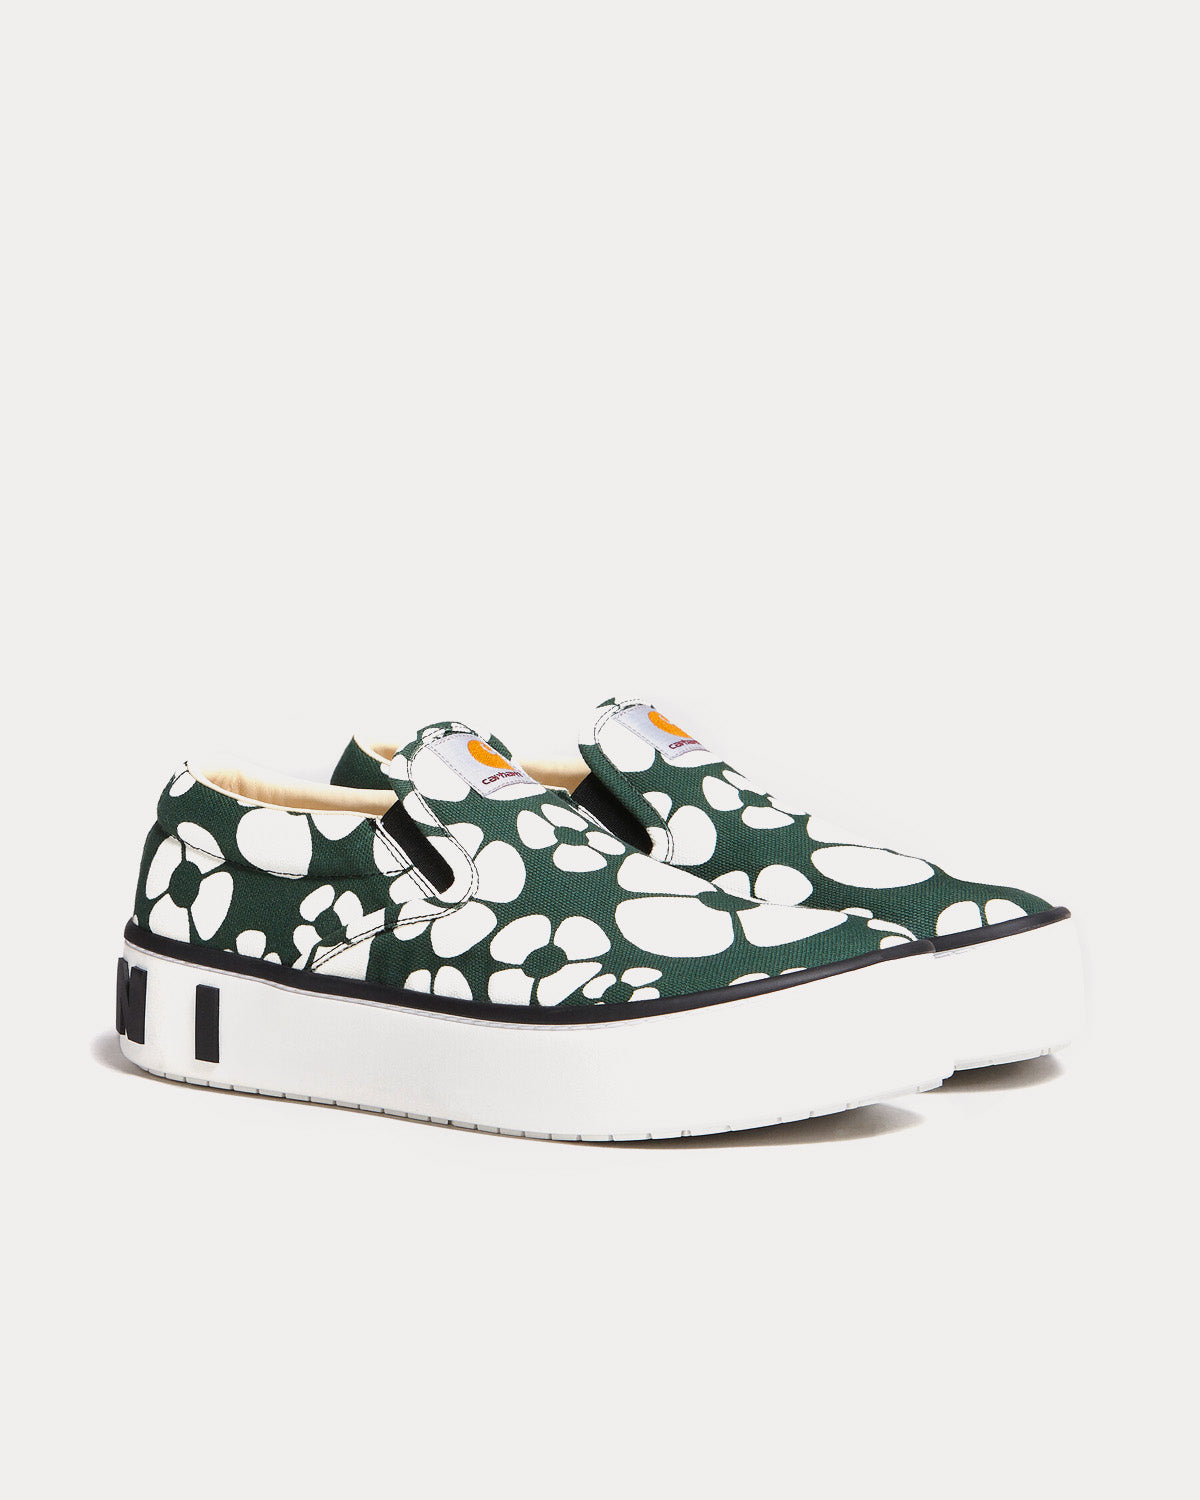 Marni x Carhartt - Canvas Forest Green / Stone White Slip On Sneakers